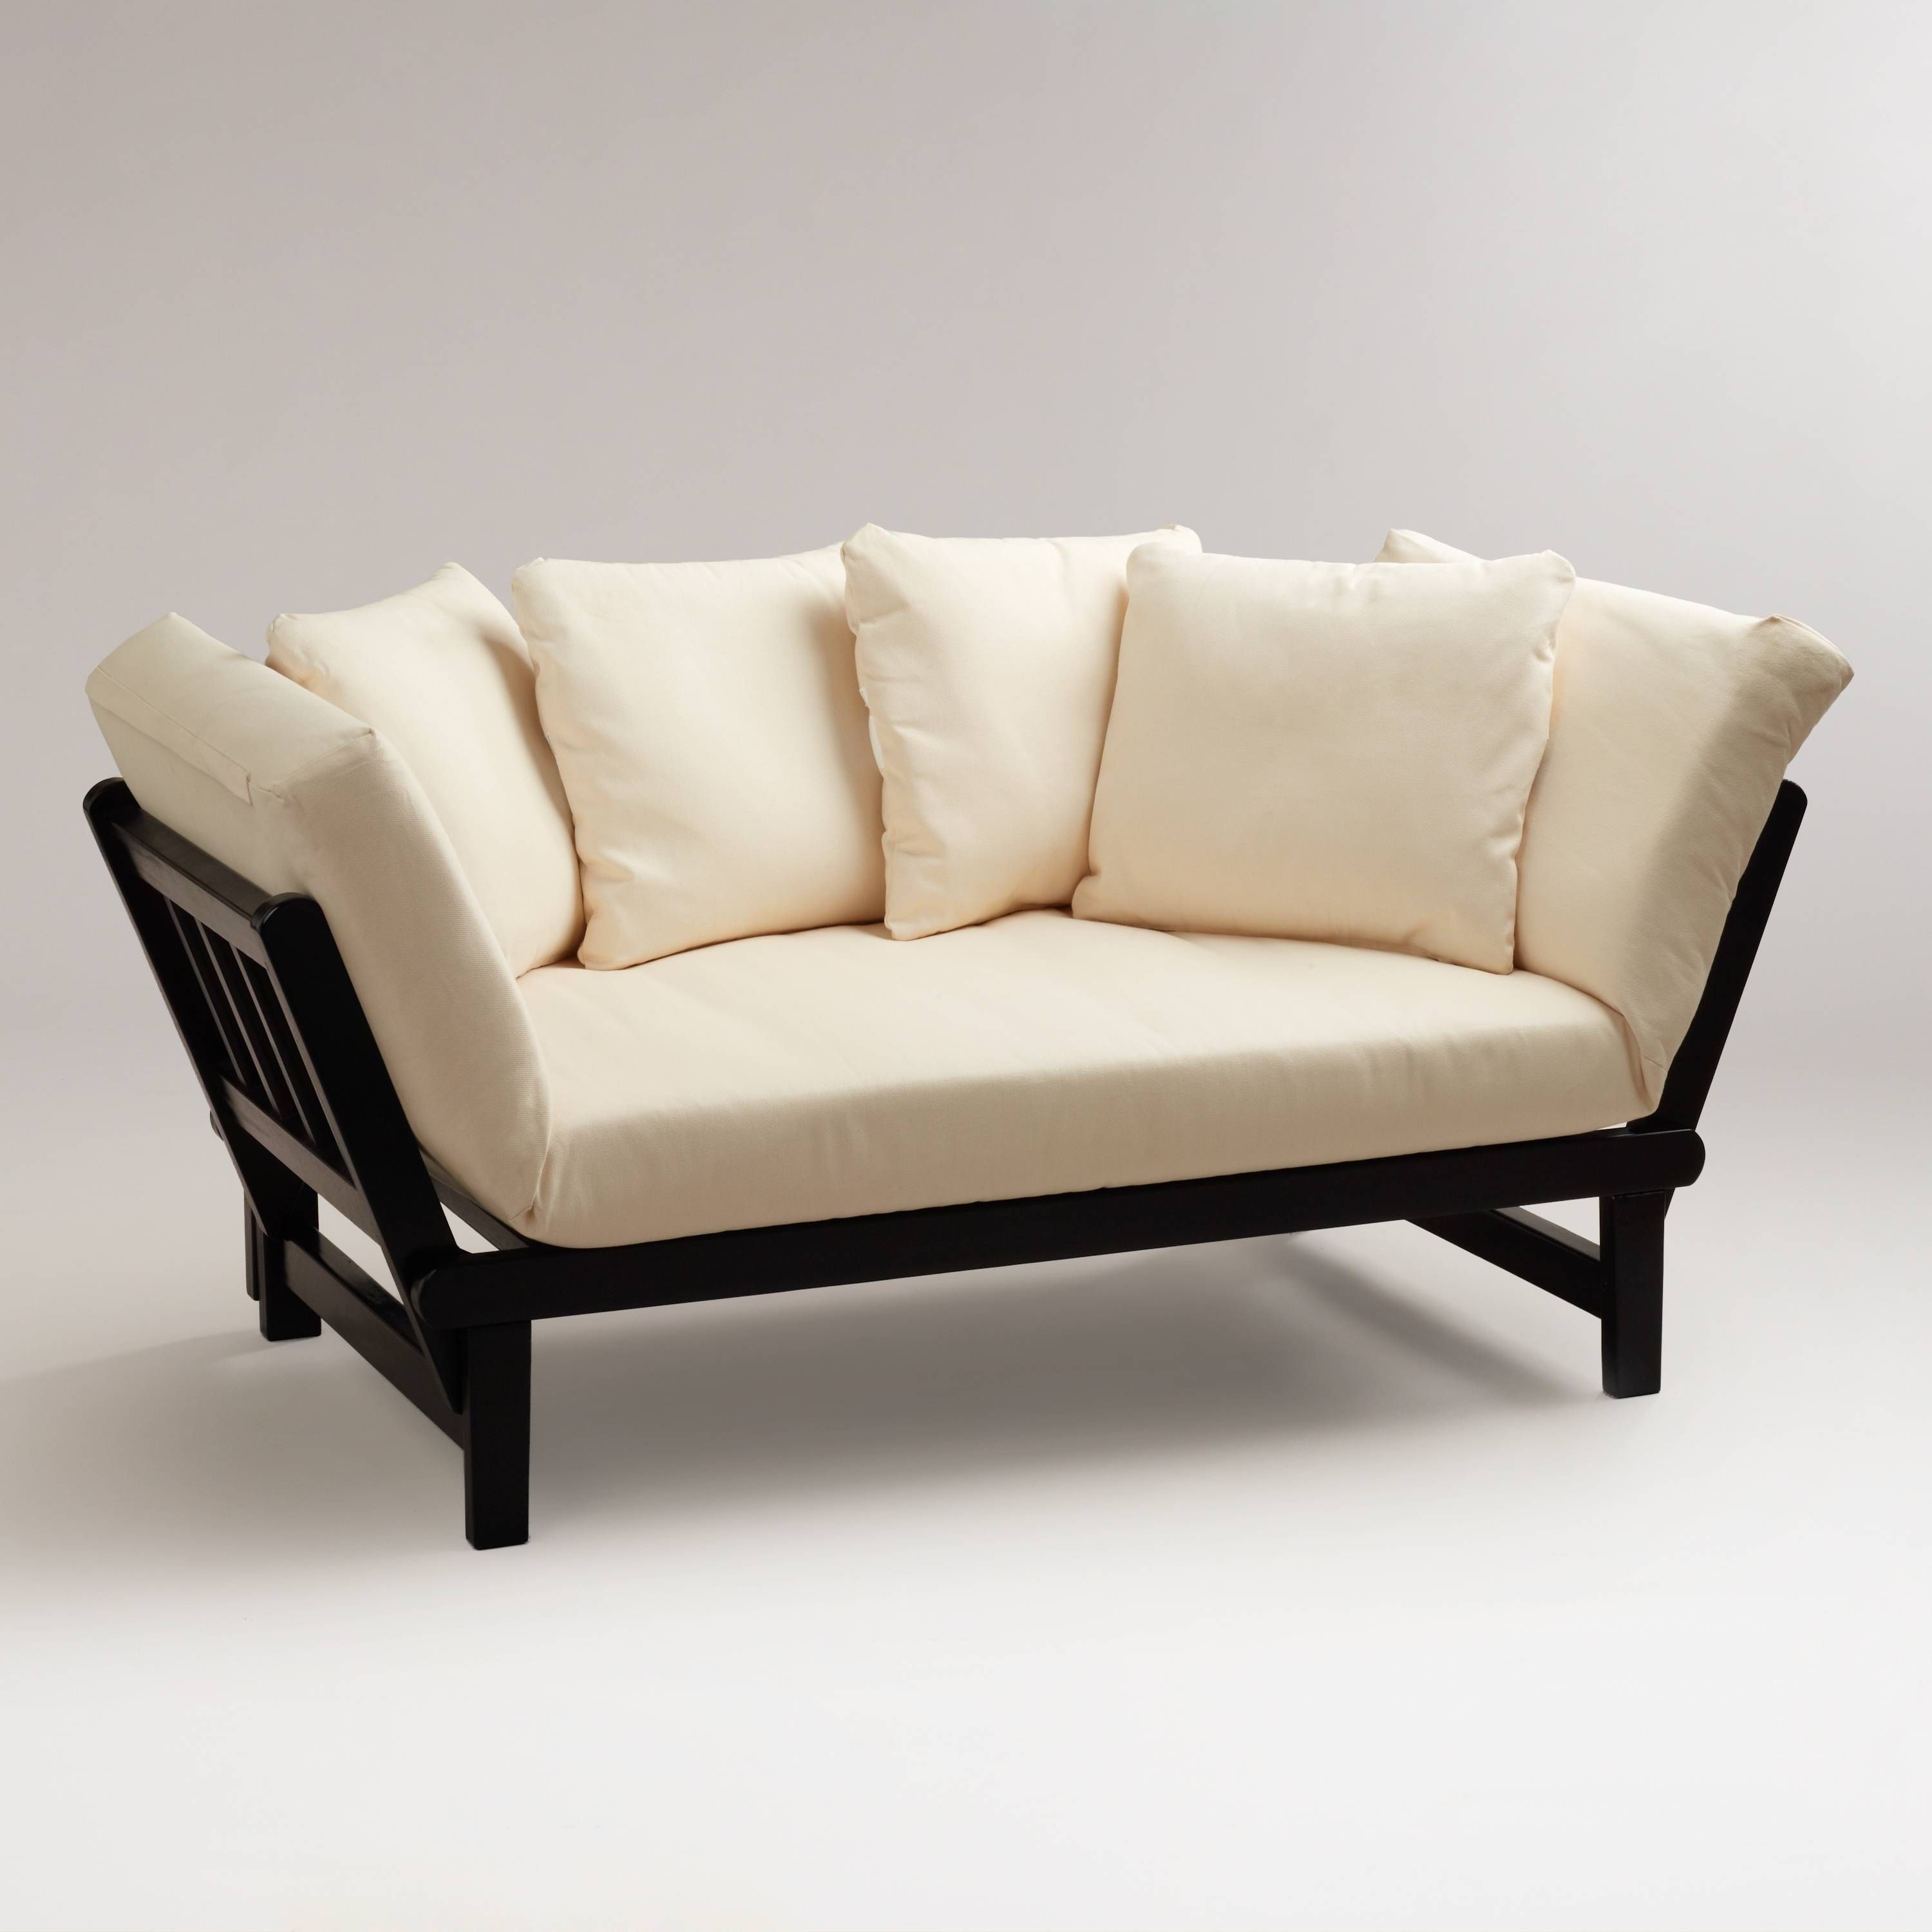 Studio Day Sofa | World Market With Folding Sofa Chairs (View 29 of 30)